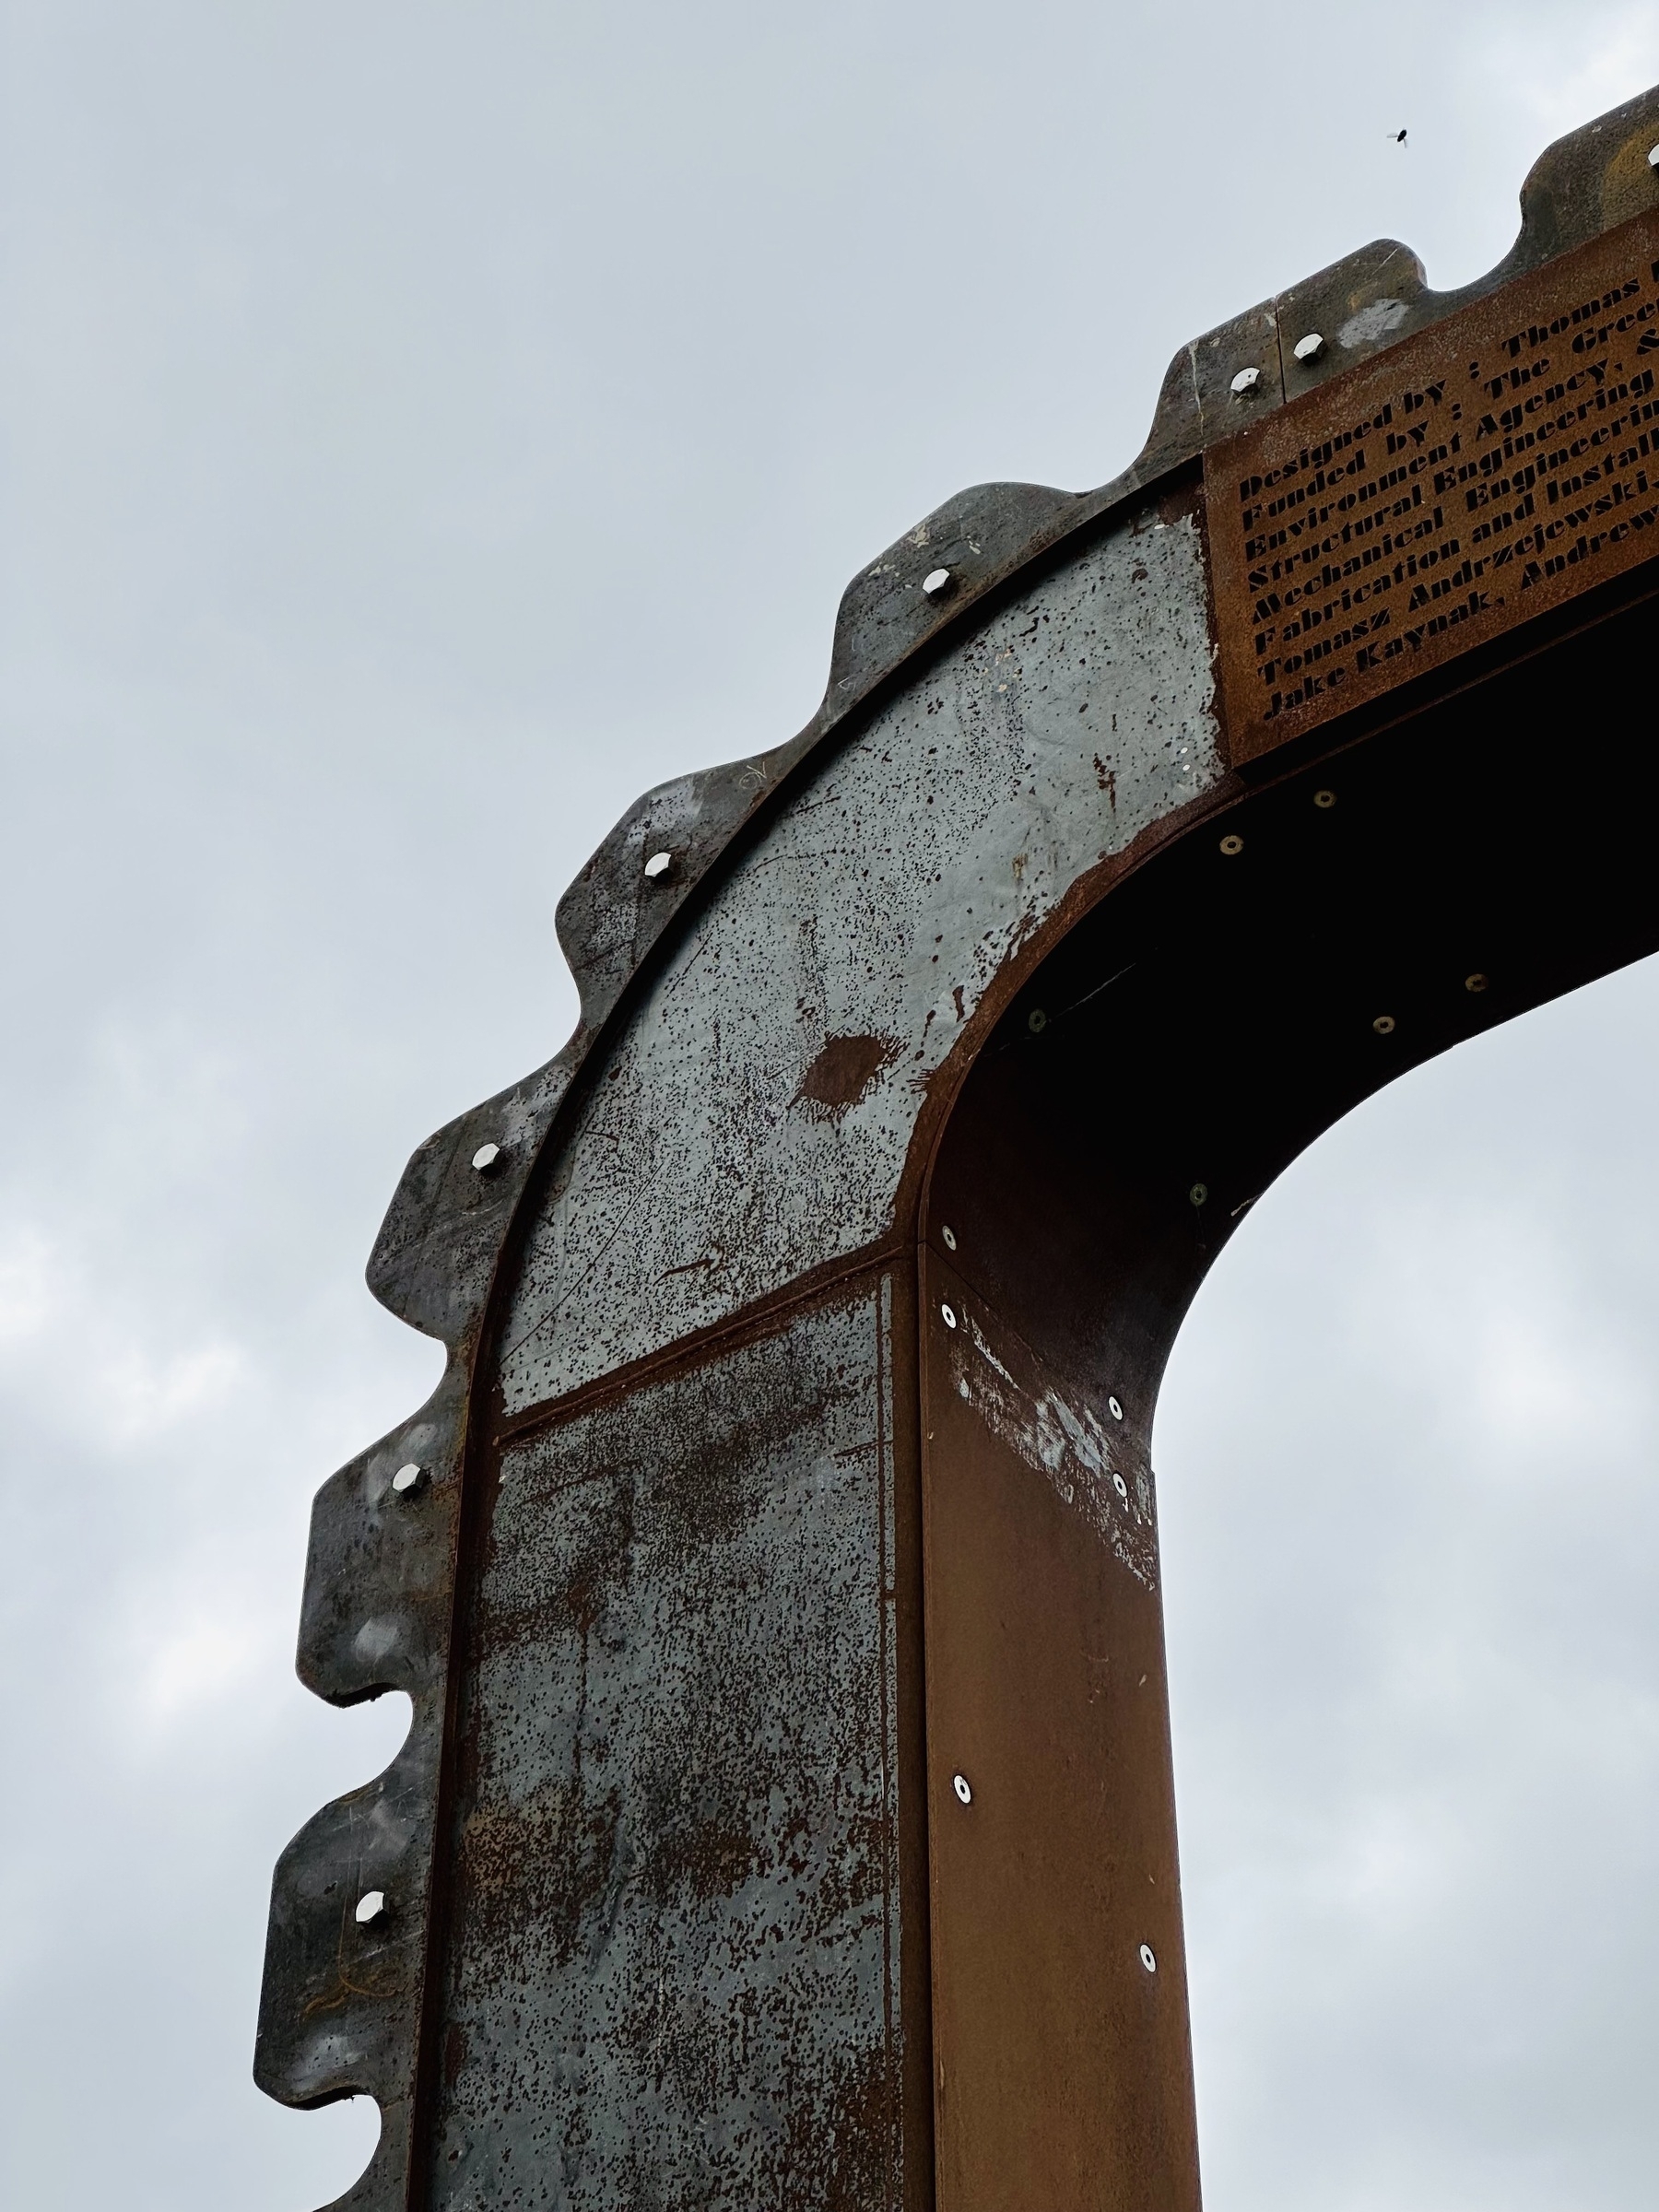 The corner of a toothed metal frame. The metal is partially rusted, making patterns of grey and orange.